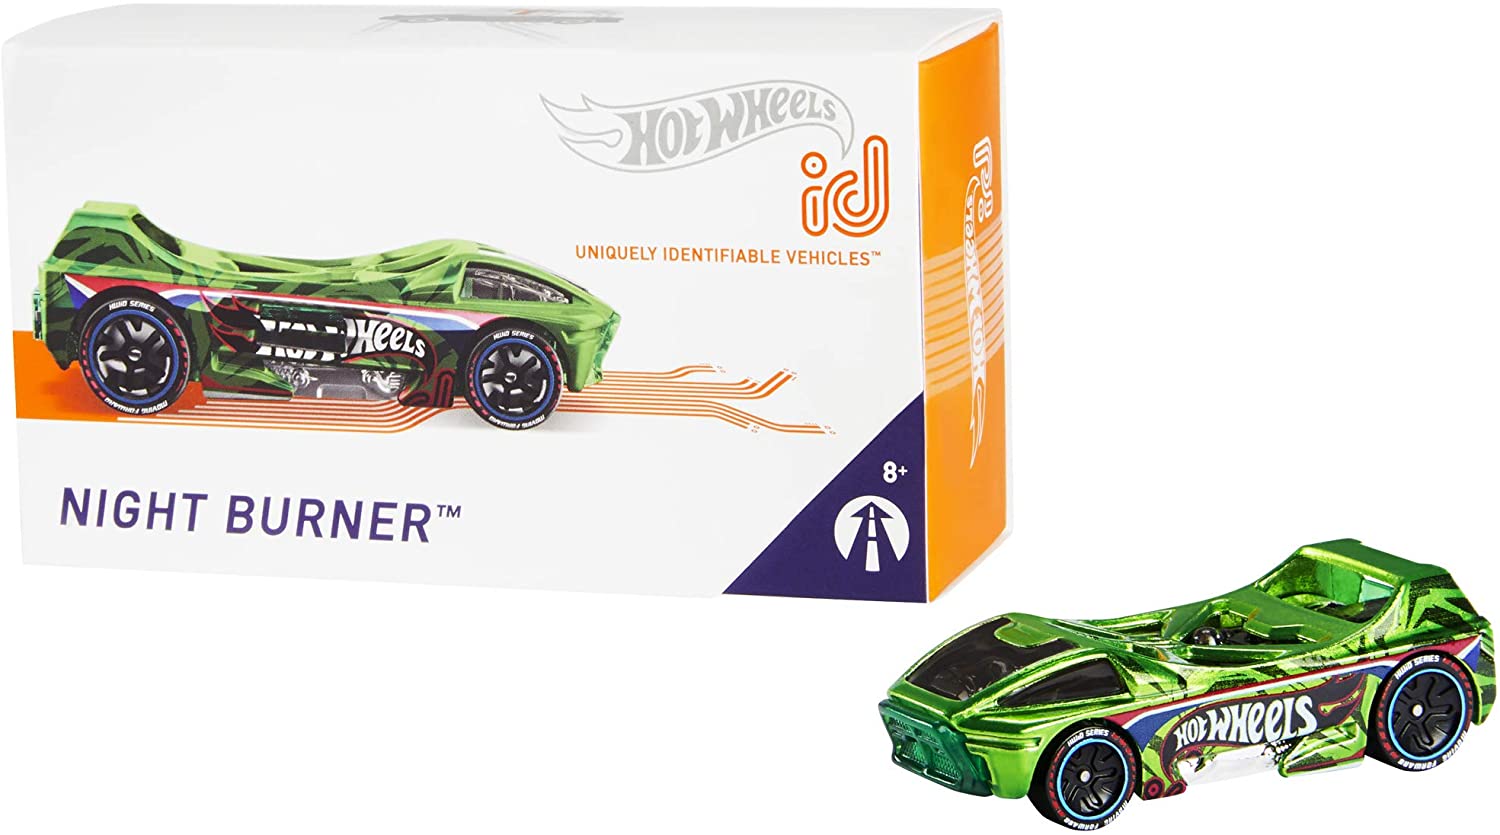 How Hot Wheels creates its cool and timeless toy cars